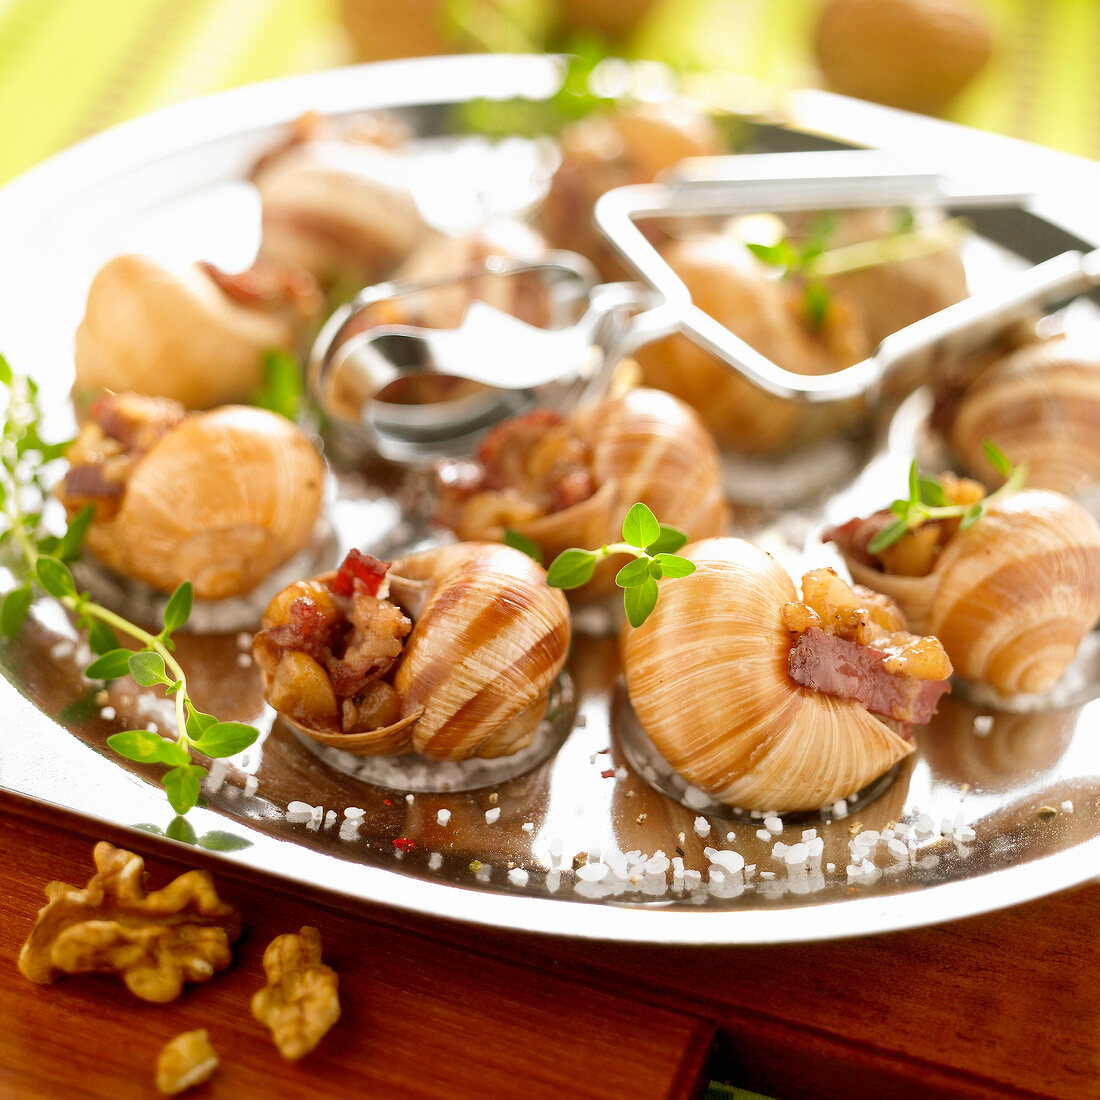 Snails stuffed with diced bacon and walnuts